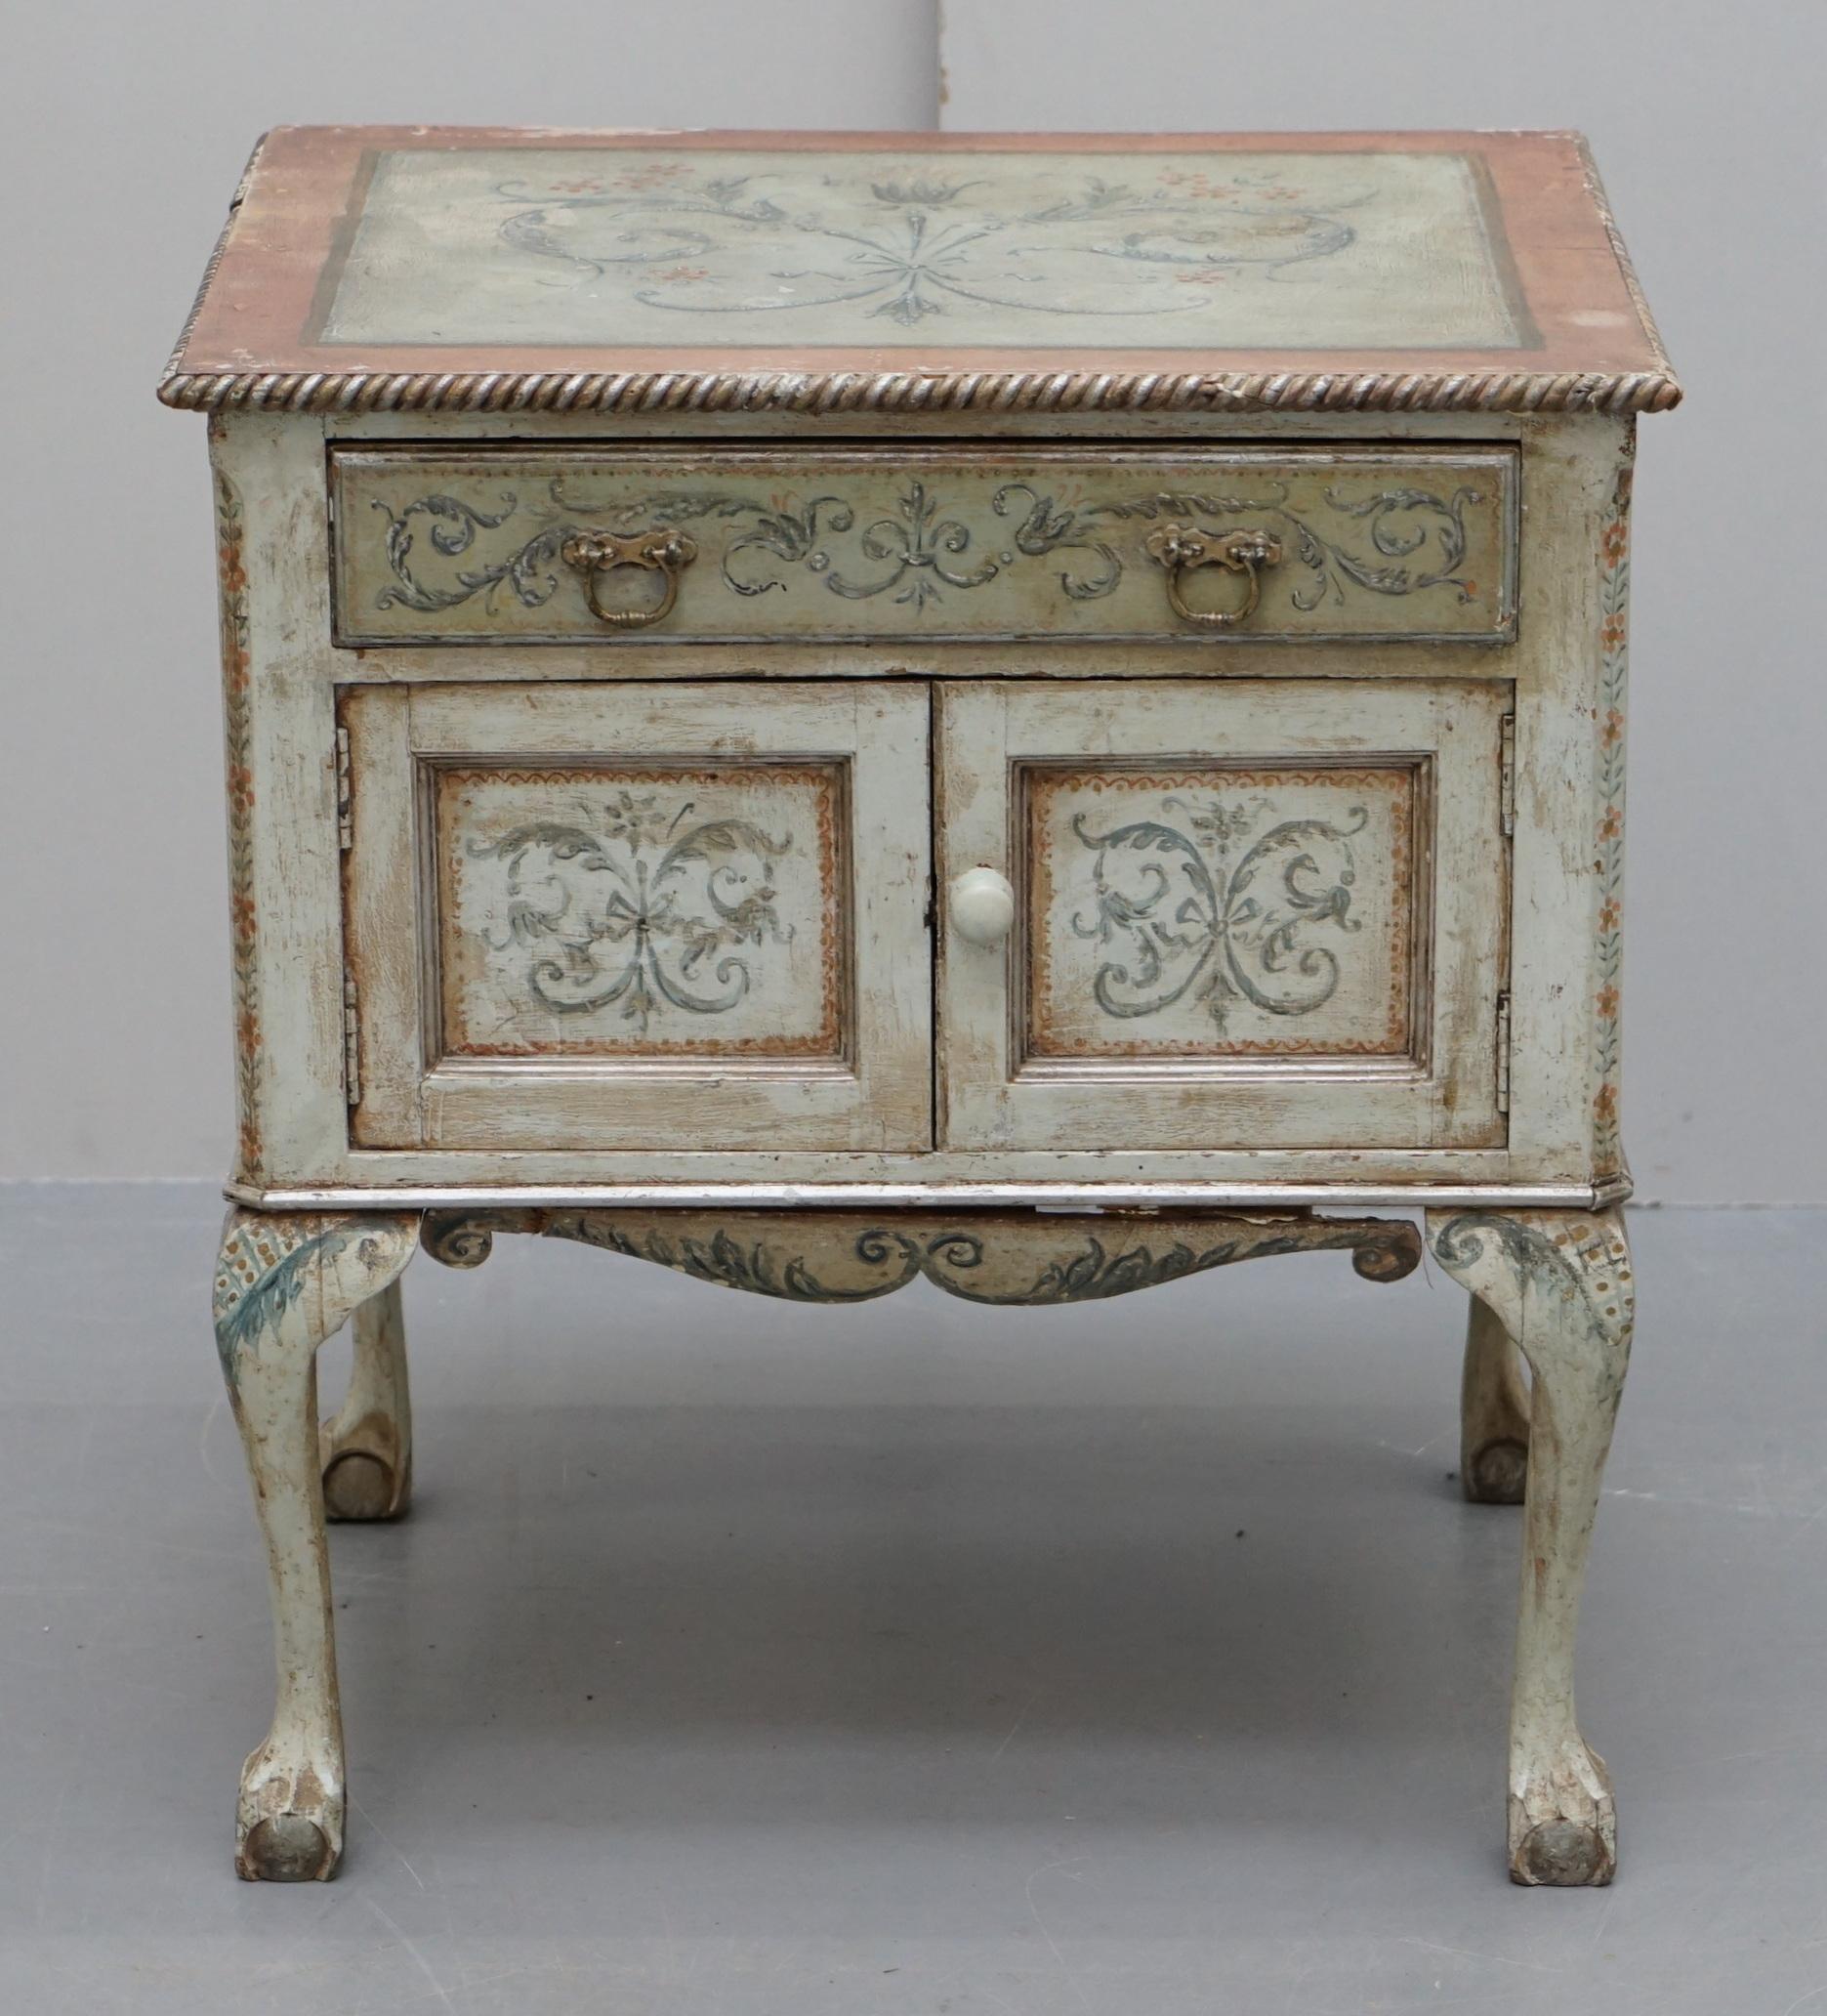 We are delighted to offer for sale this lovely circa 1900 late Victorian hand painted side table cupboard with elegant claw and ball legs

A good looking and very decorative piece, the hand painted finish is exquisite, original and to a very high